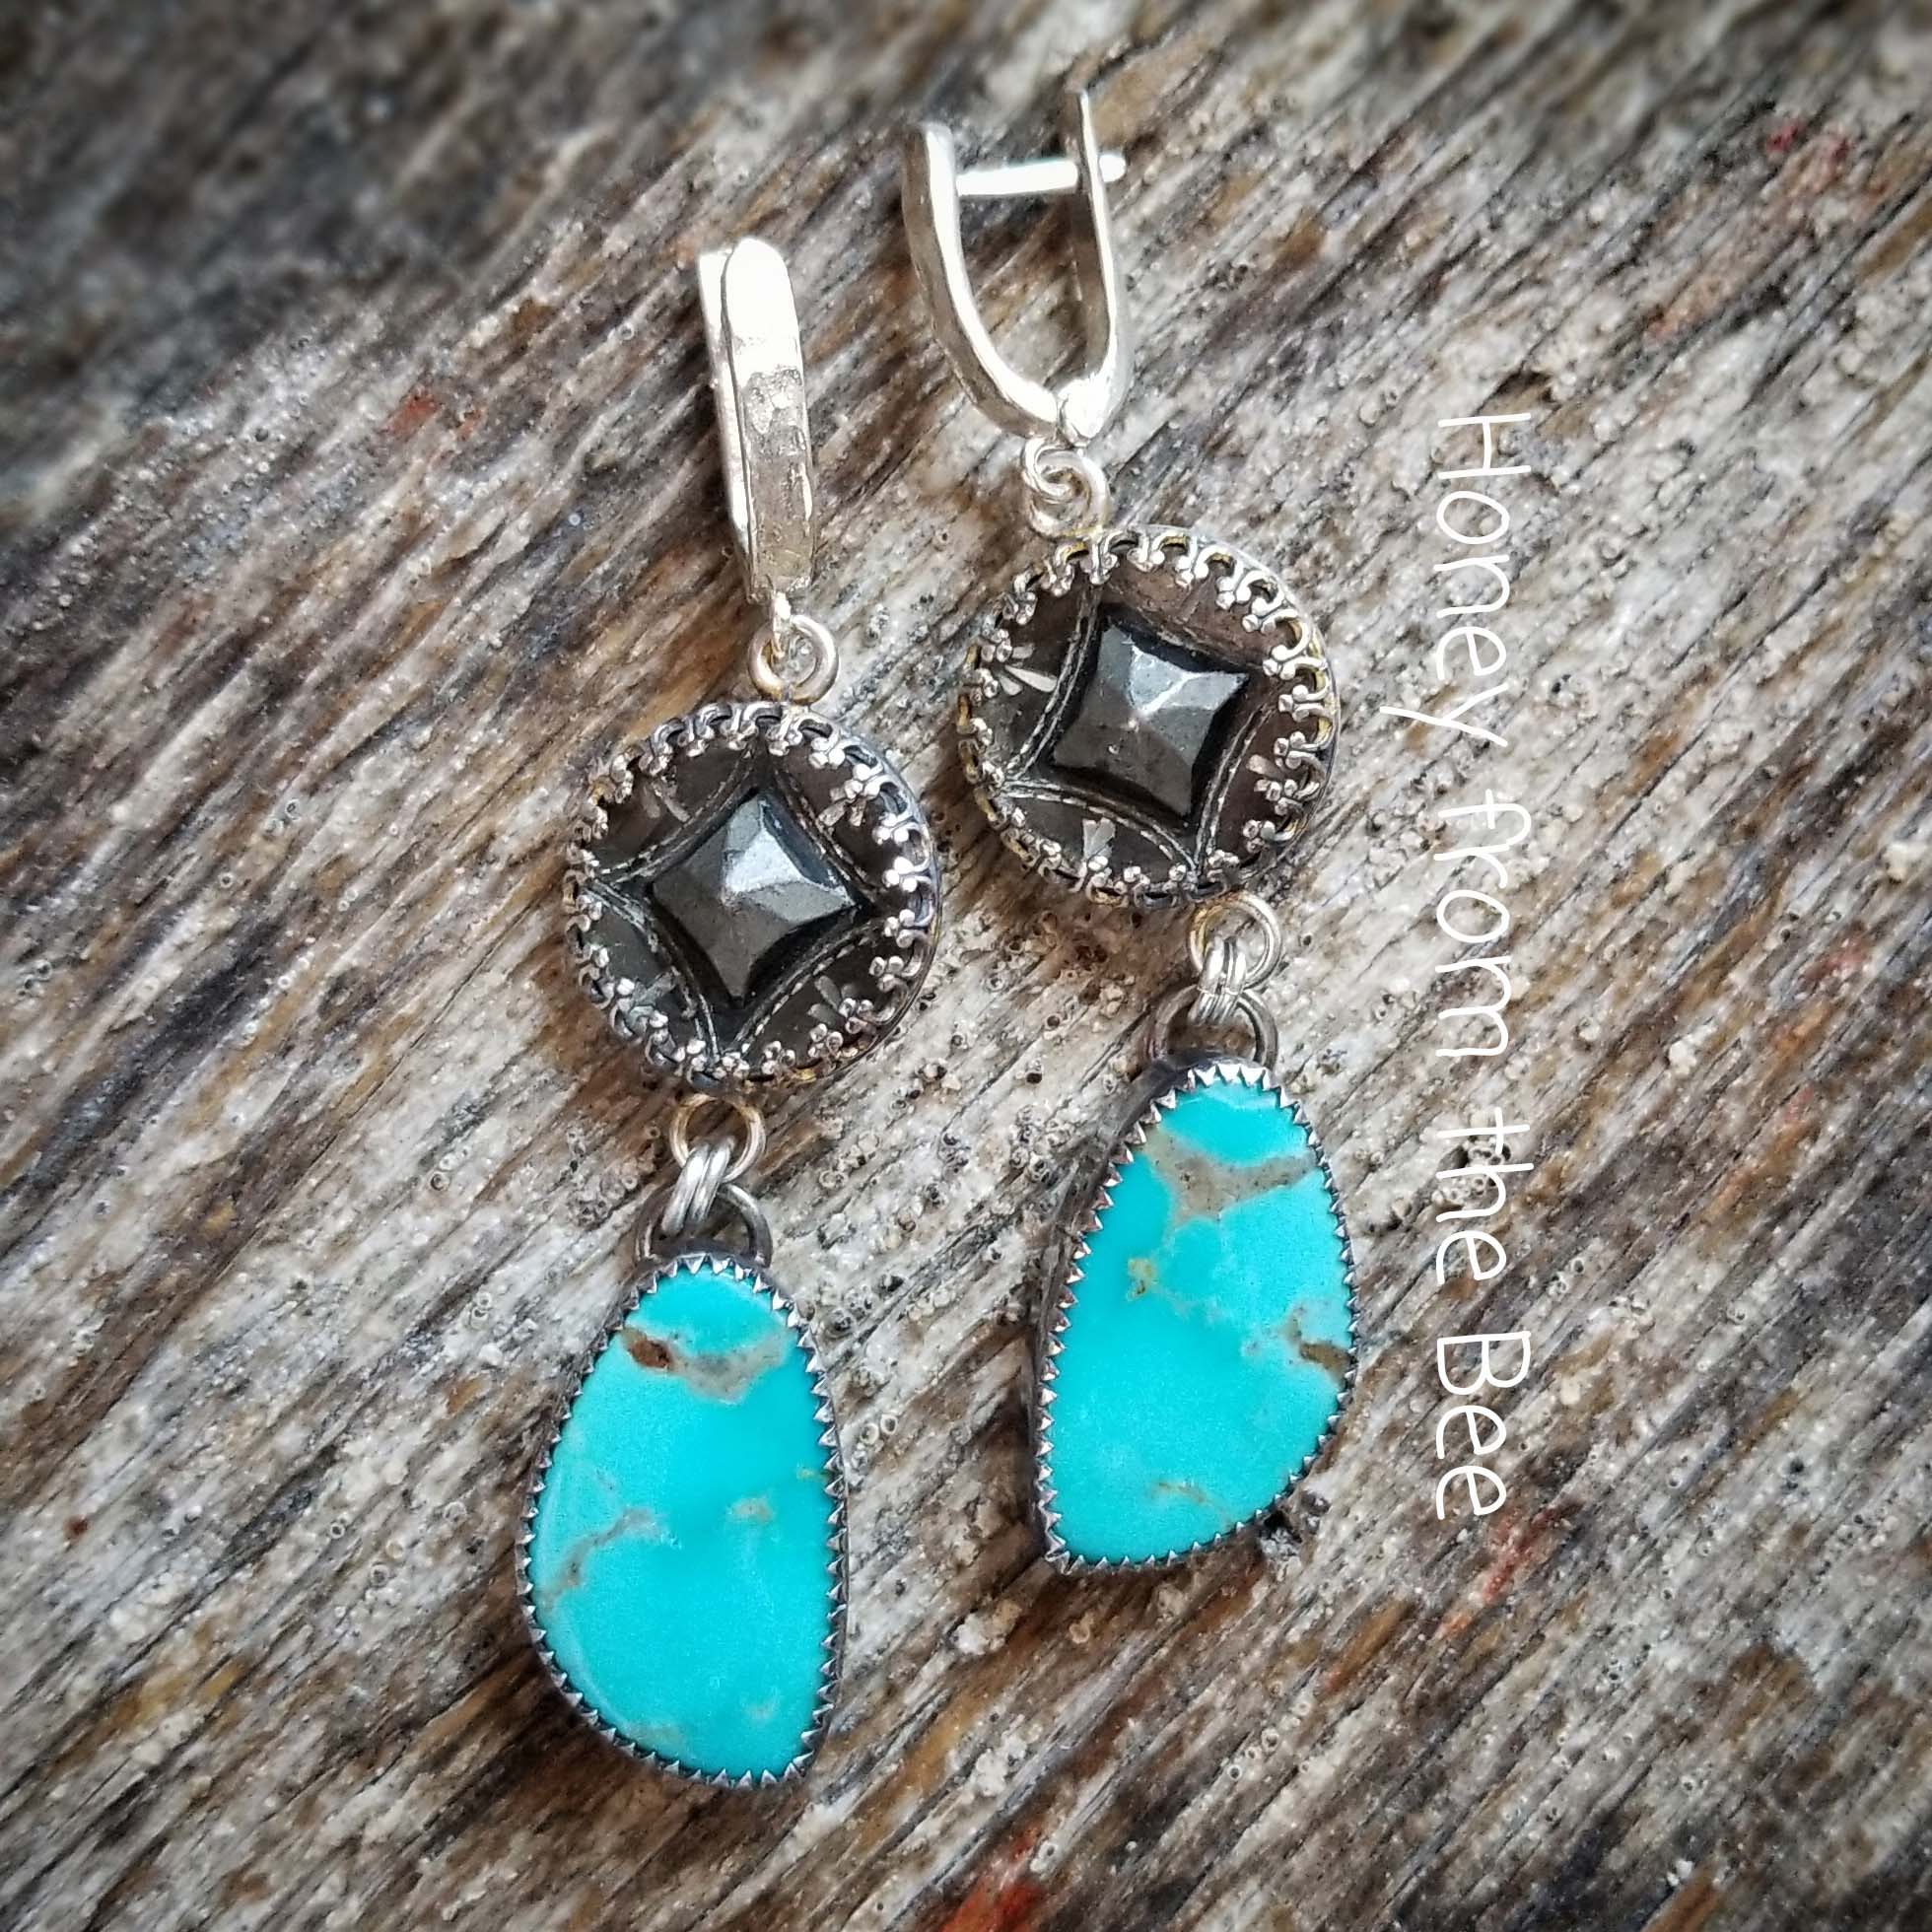 Antique button earrings with Kingman Turquoise